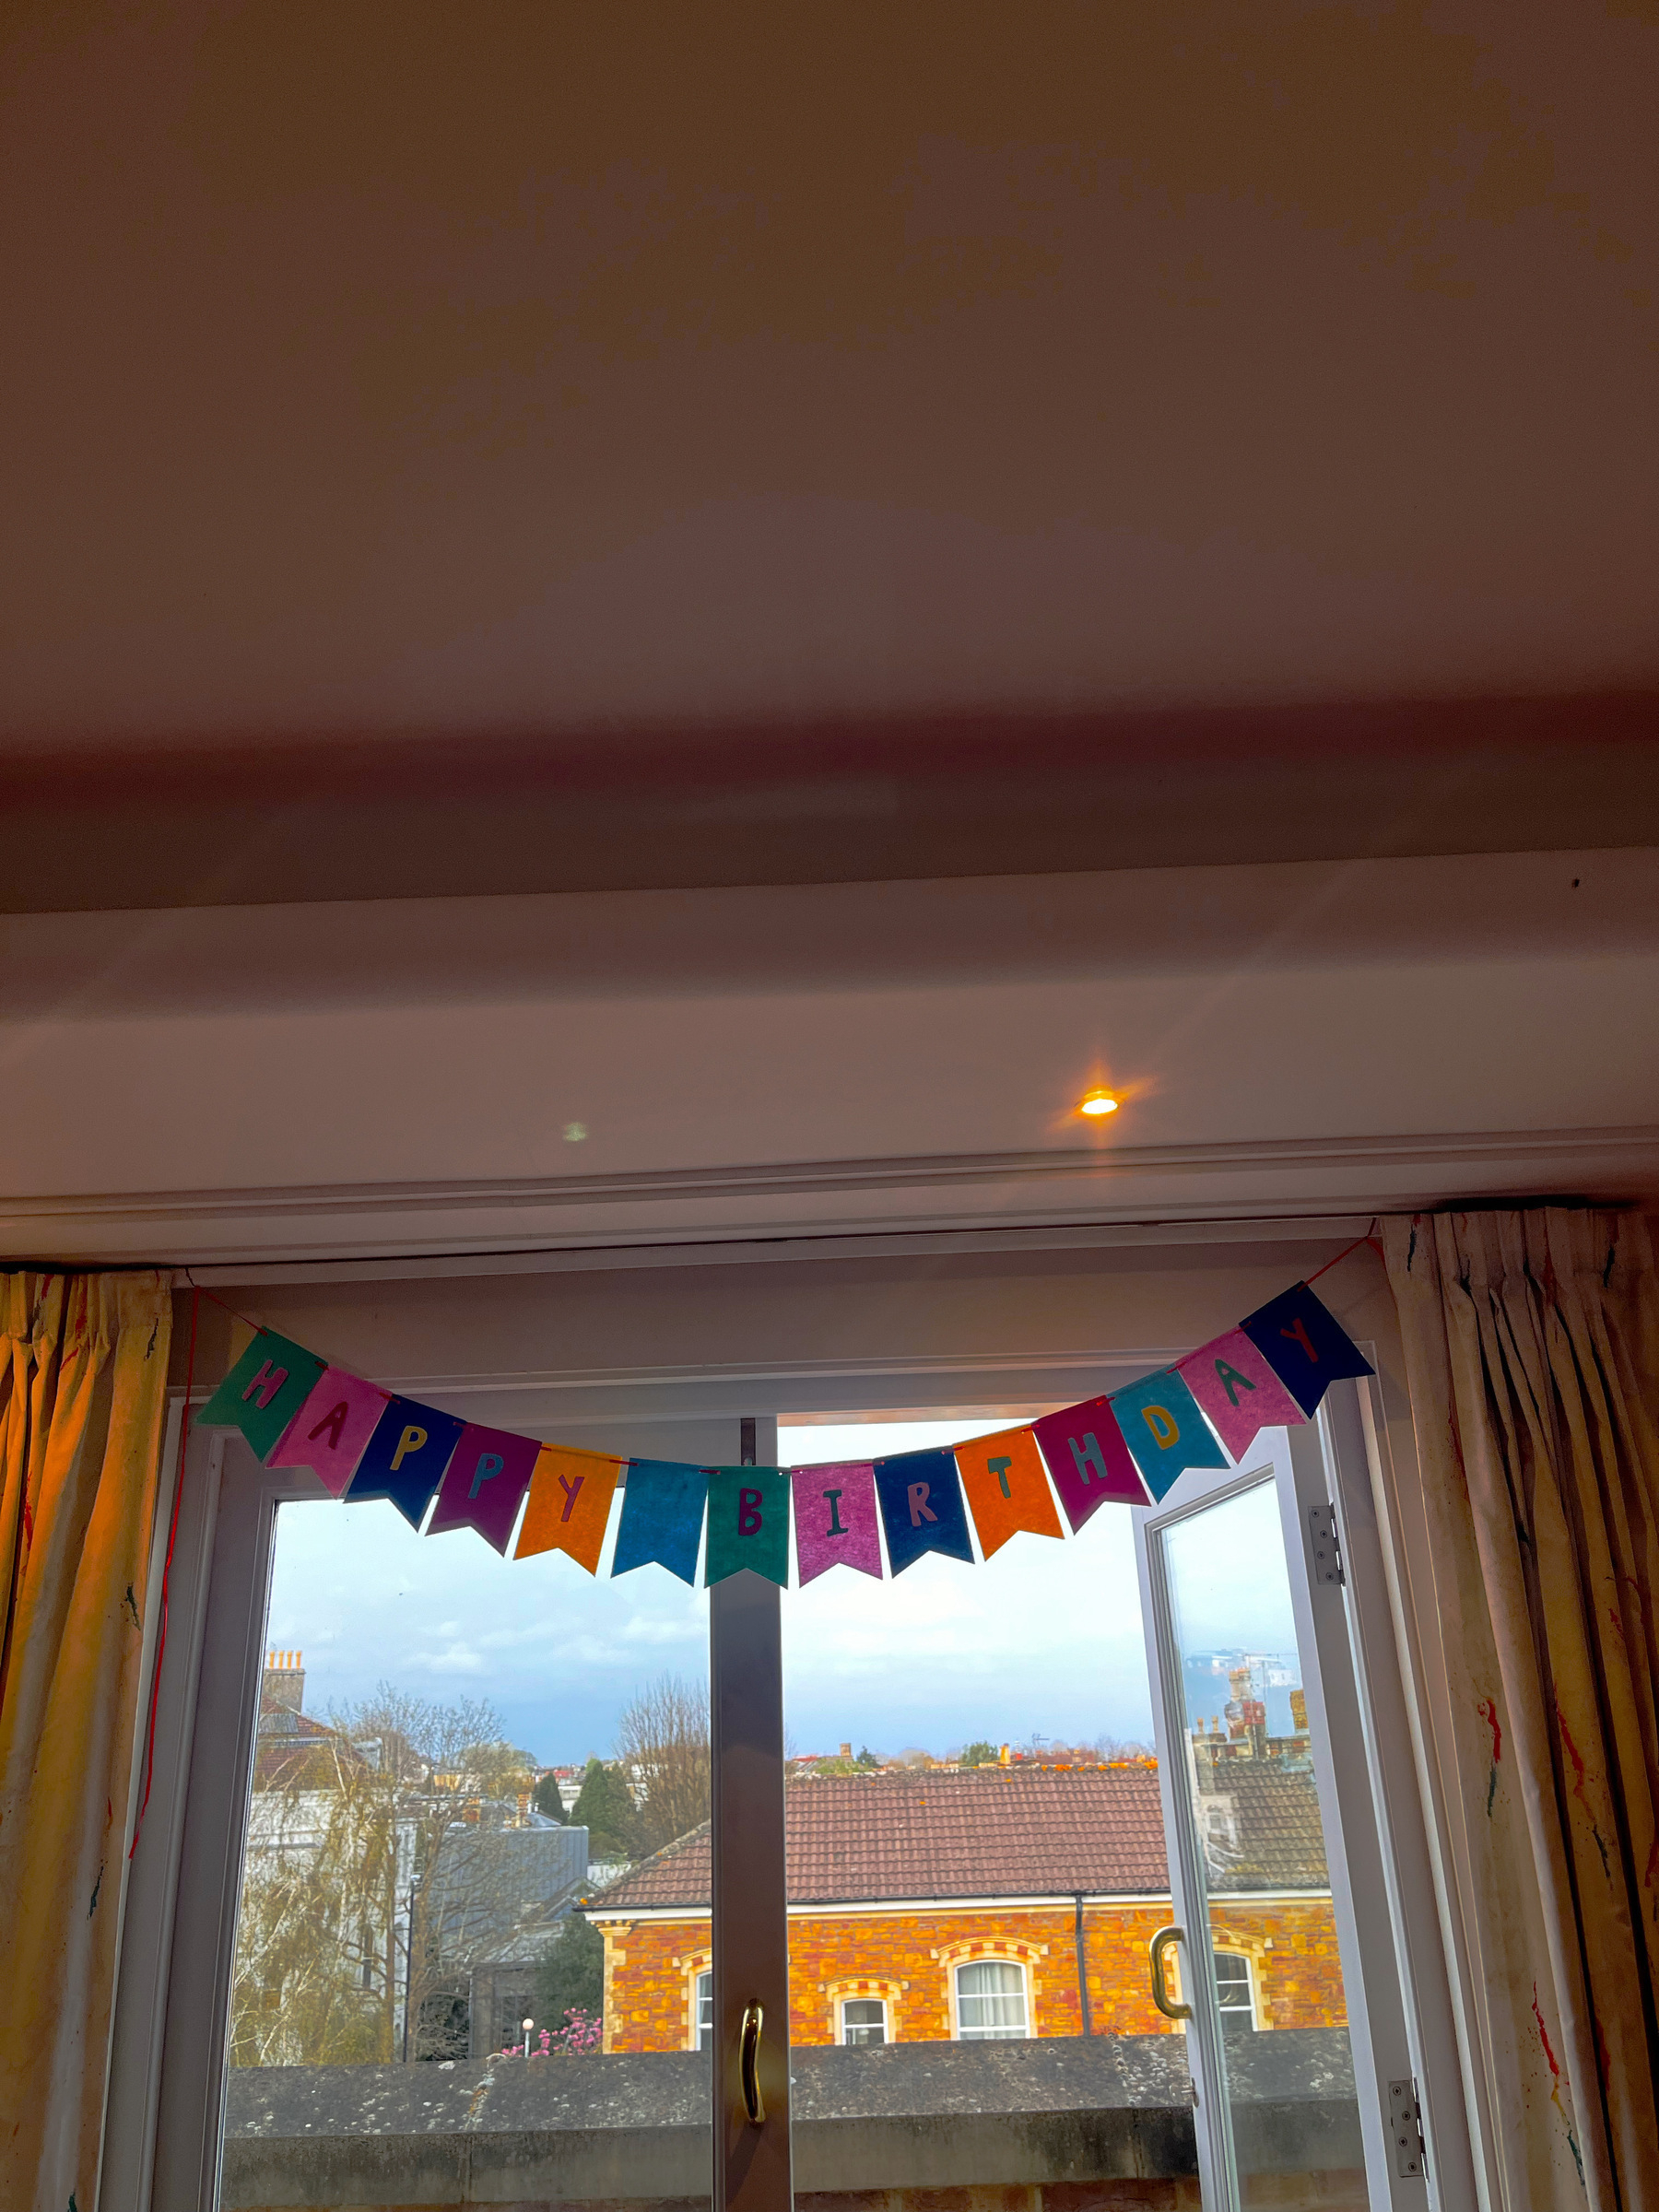 A series of small flags on a piece of string spelling out Happy Birthday. Strung above an open glass door with a view to outside